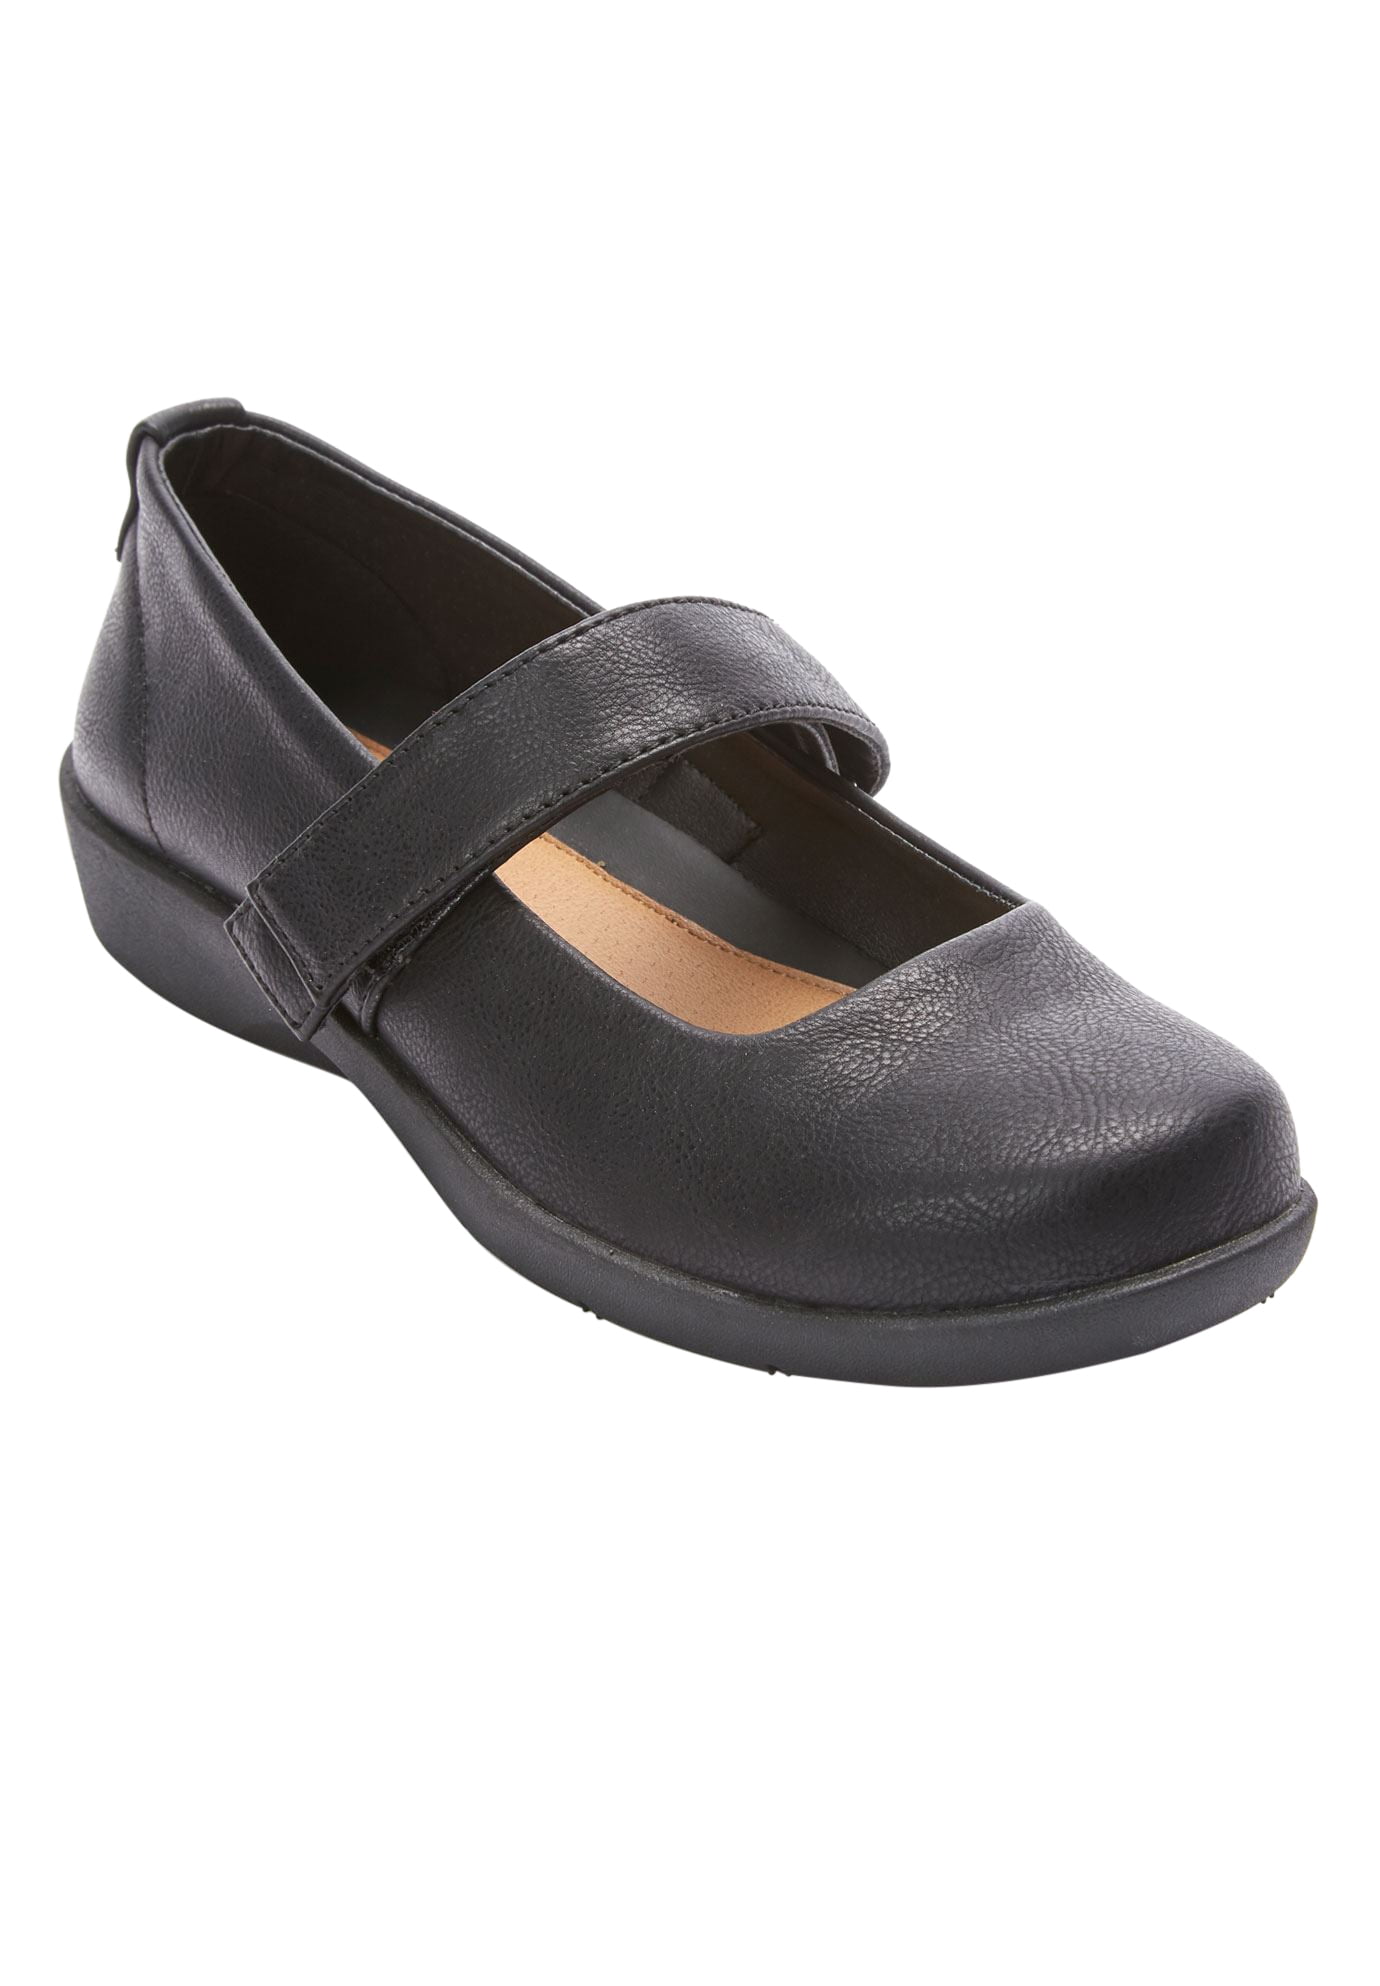 Comfortview Women's Wide Width The Carla Mary Jane Flat Mary Jane Shoes ...